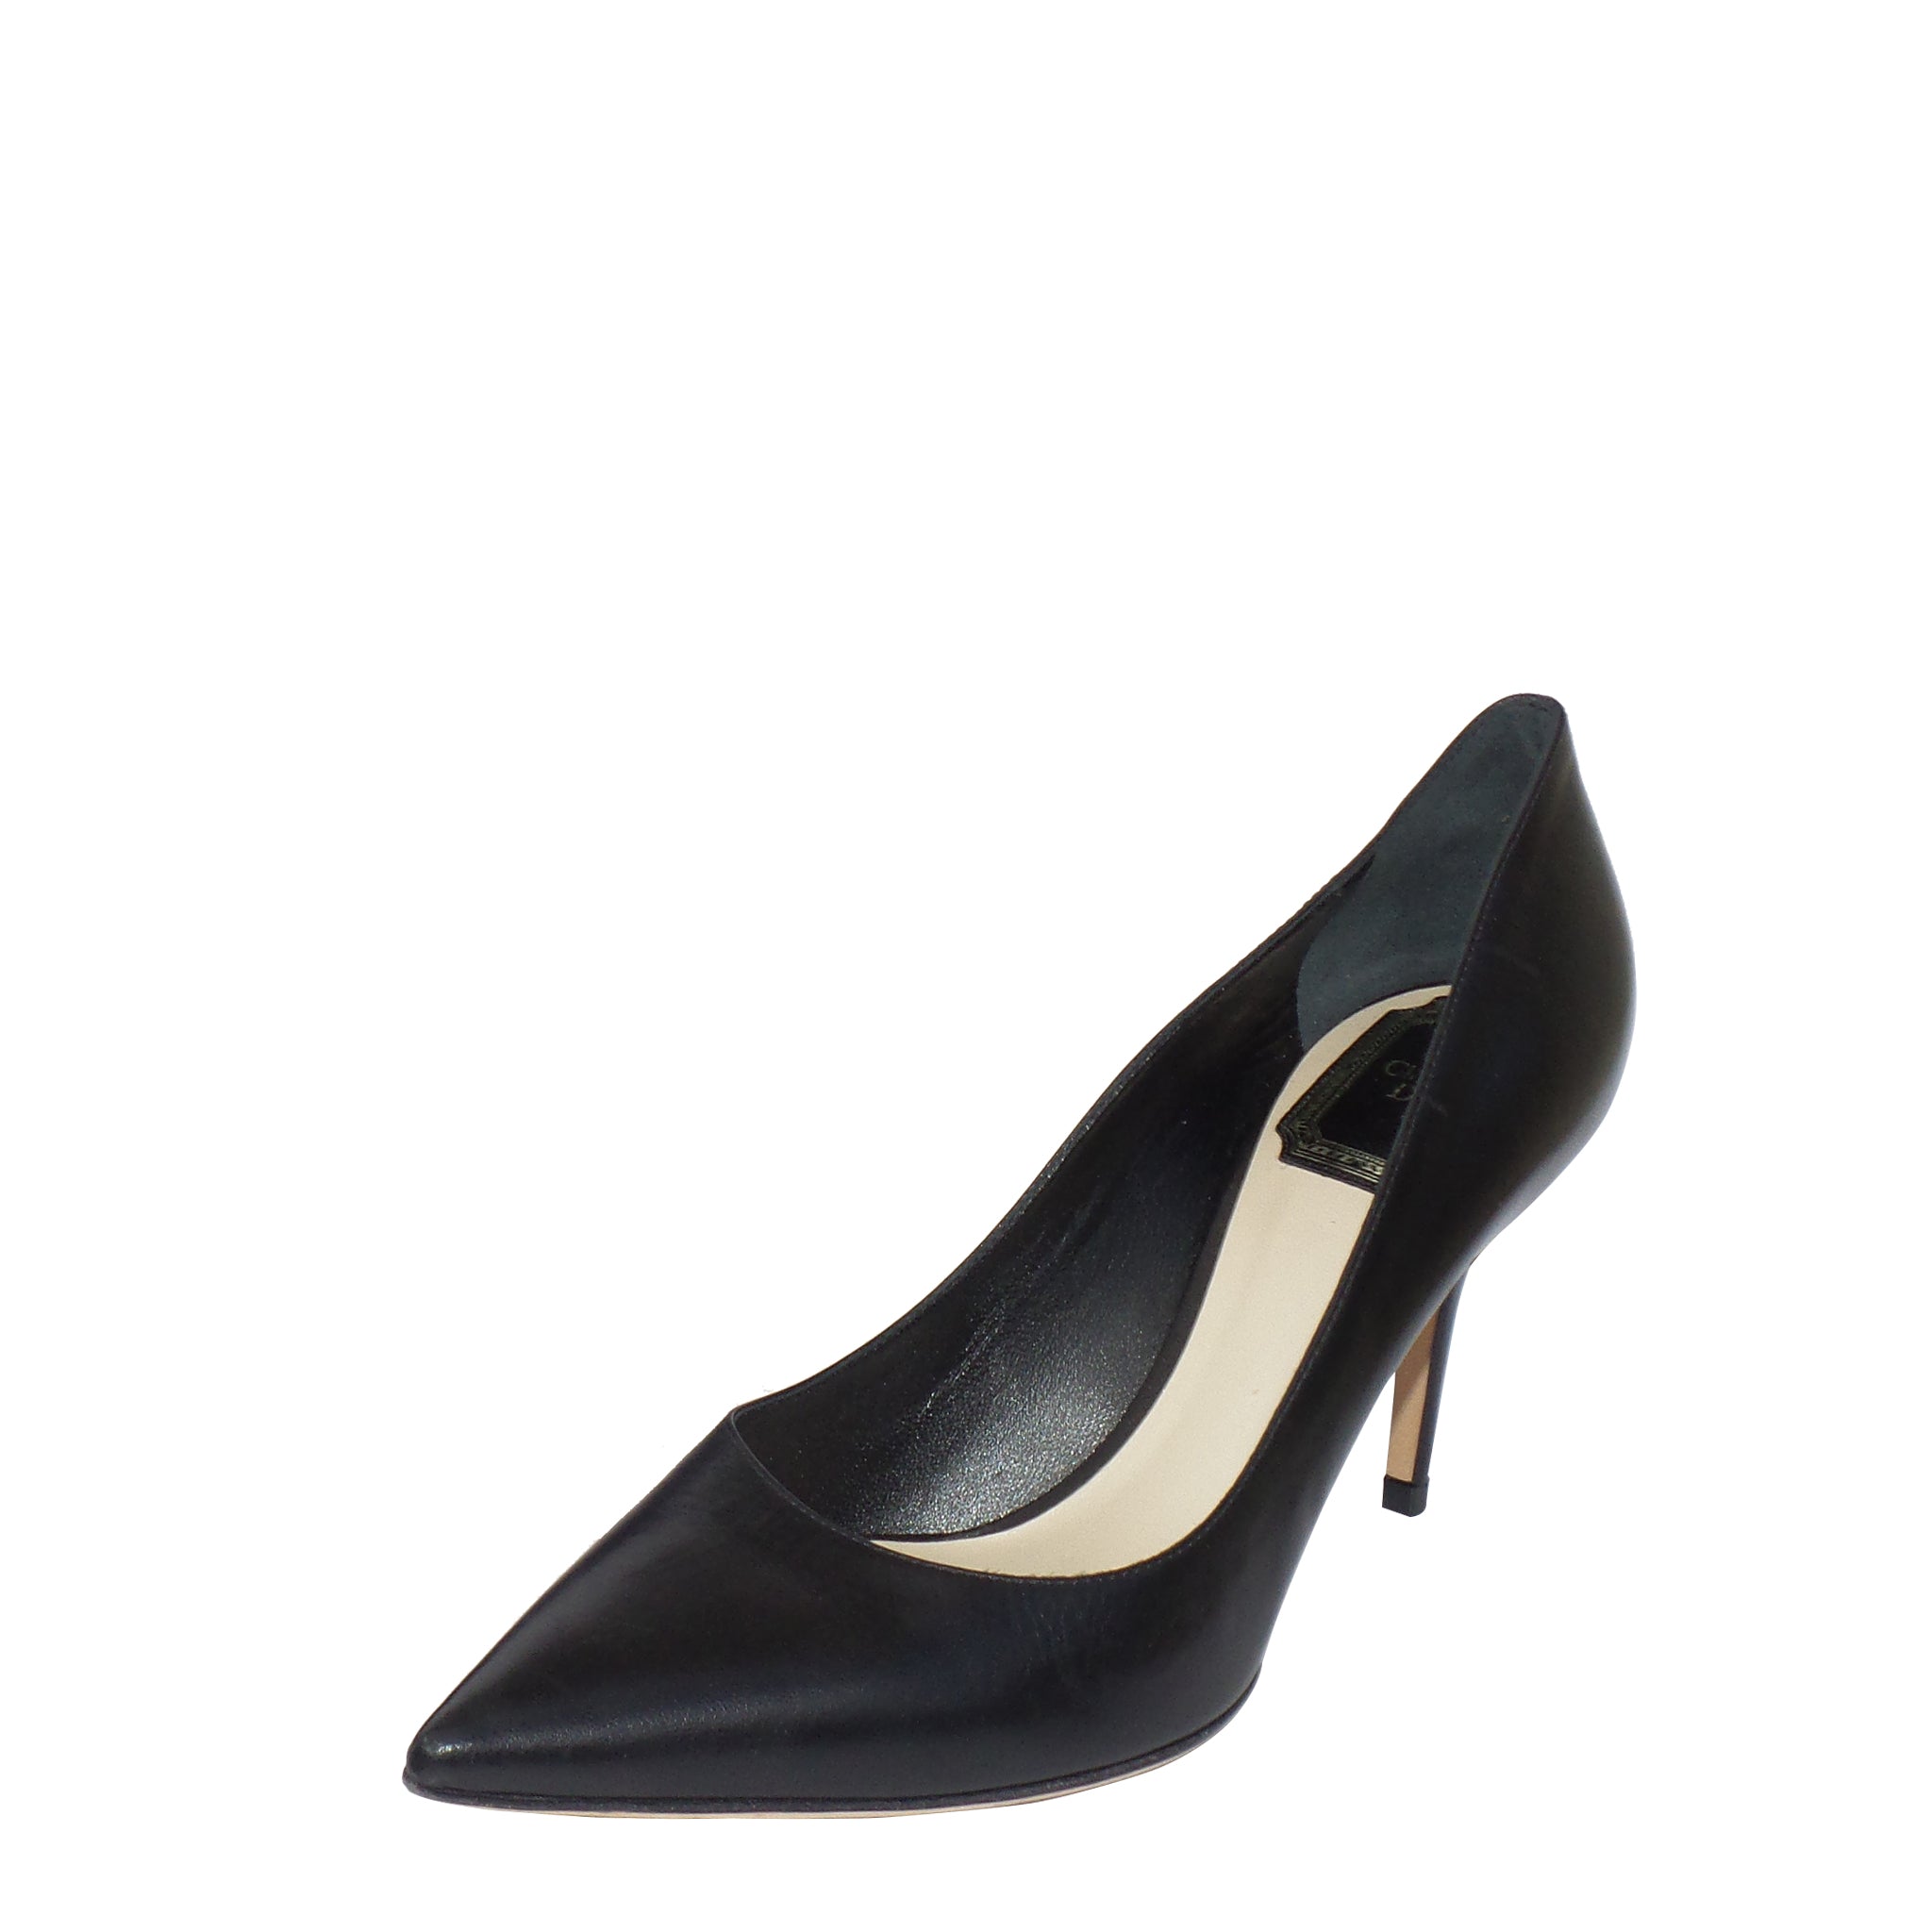 CHRISTIAN DIOR Cherie 8cm Black Leather Pointy Toe Classic Pumps 36.5 ...